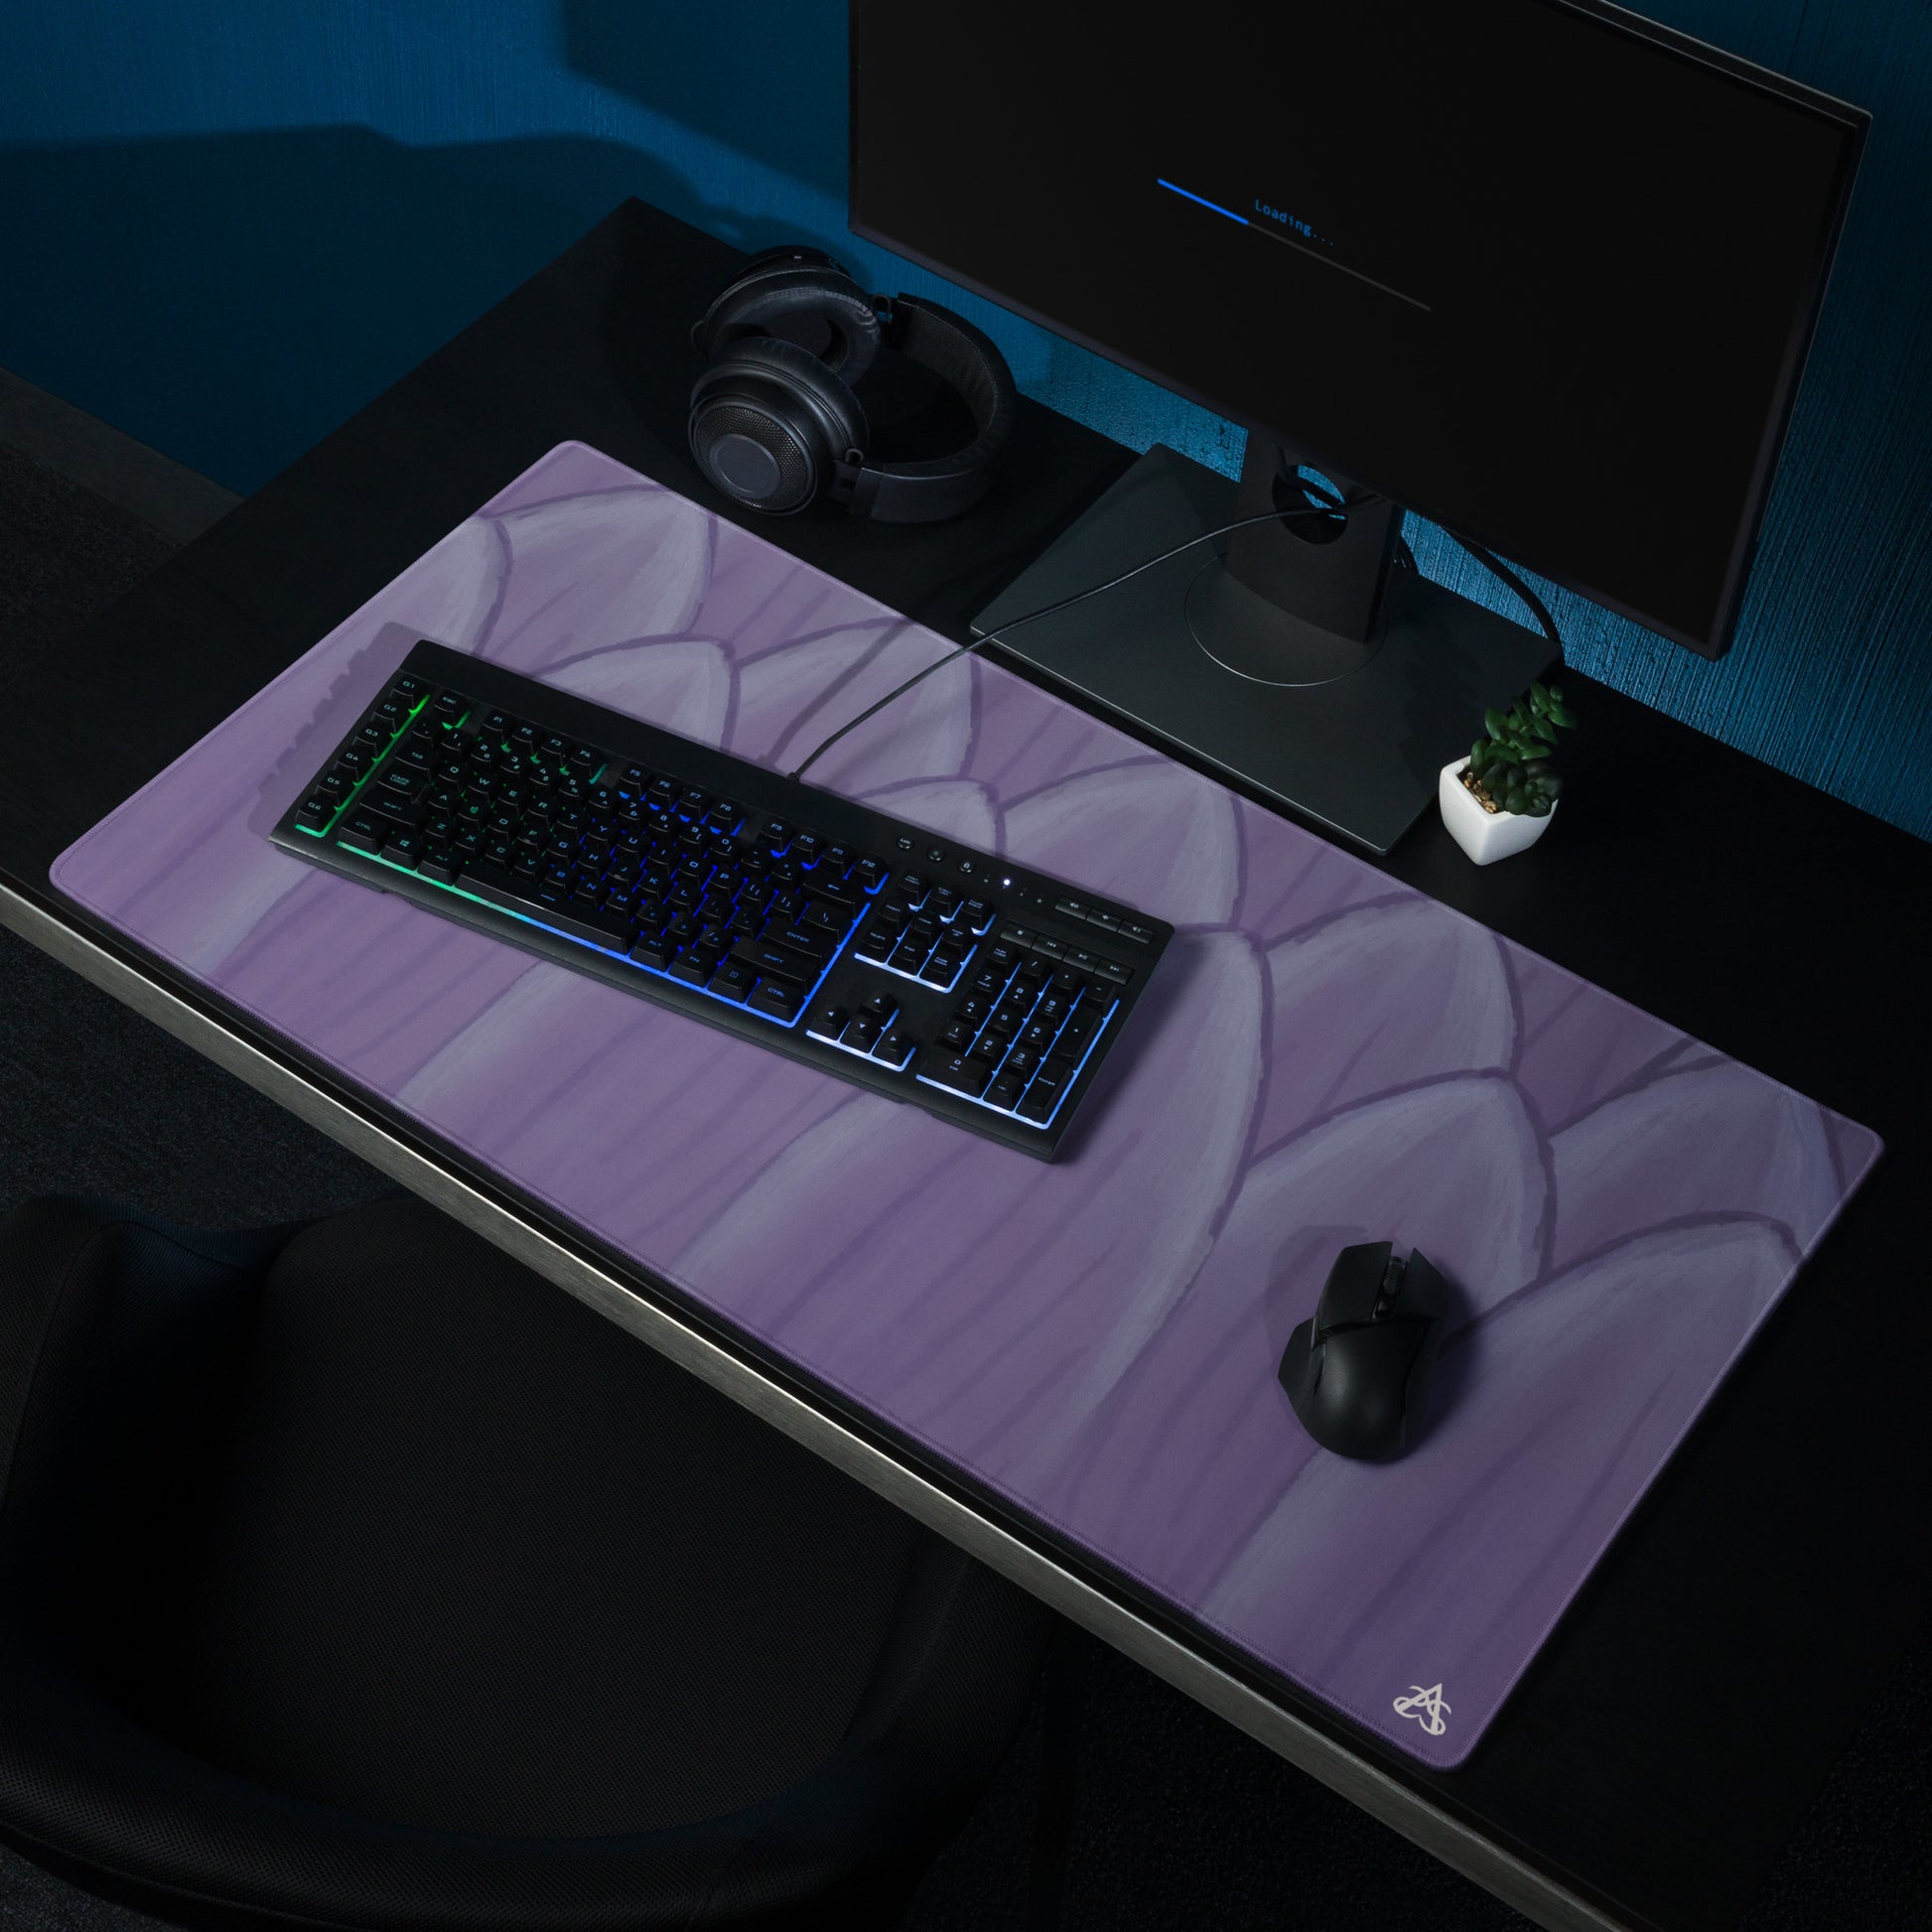 A computer set up with a lavender colored desk mat painted to look like lotus petals.